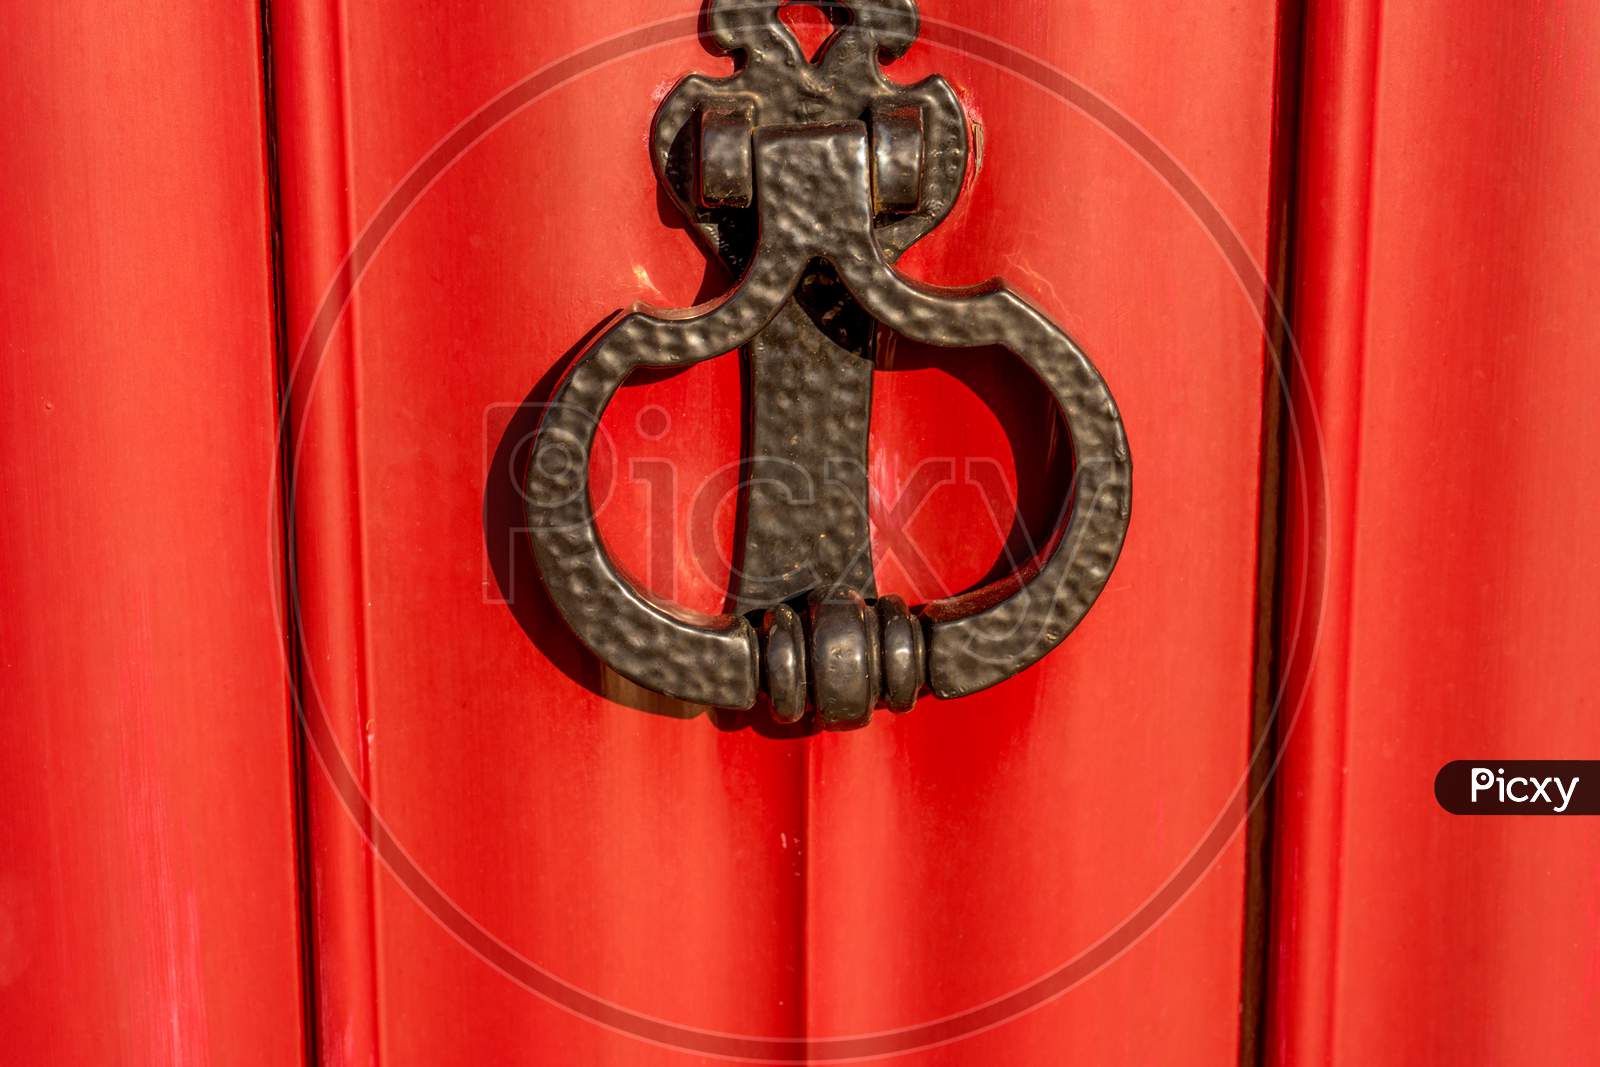 Belgium, Bruges, A Close Up Of A Red Door With A Metal Latch